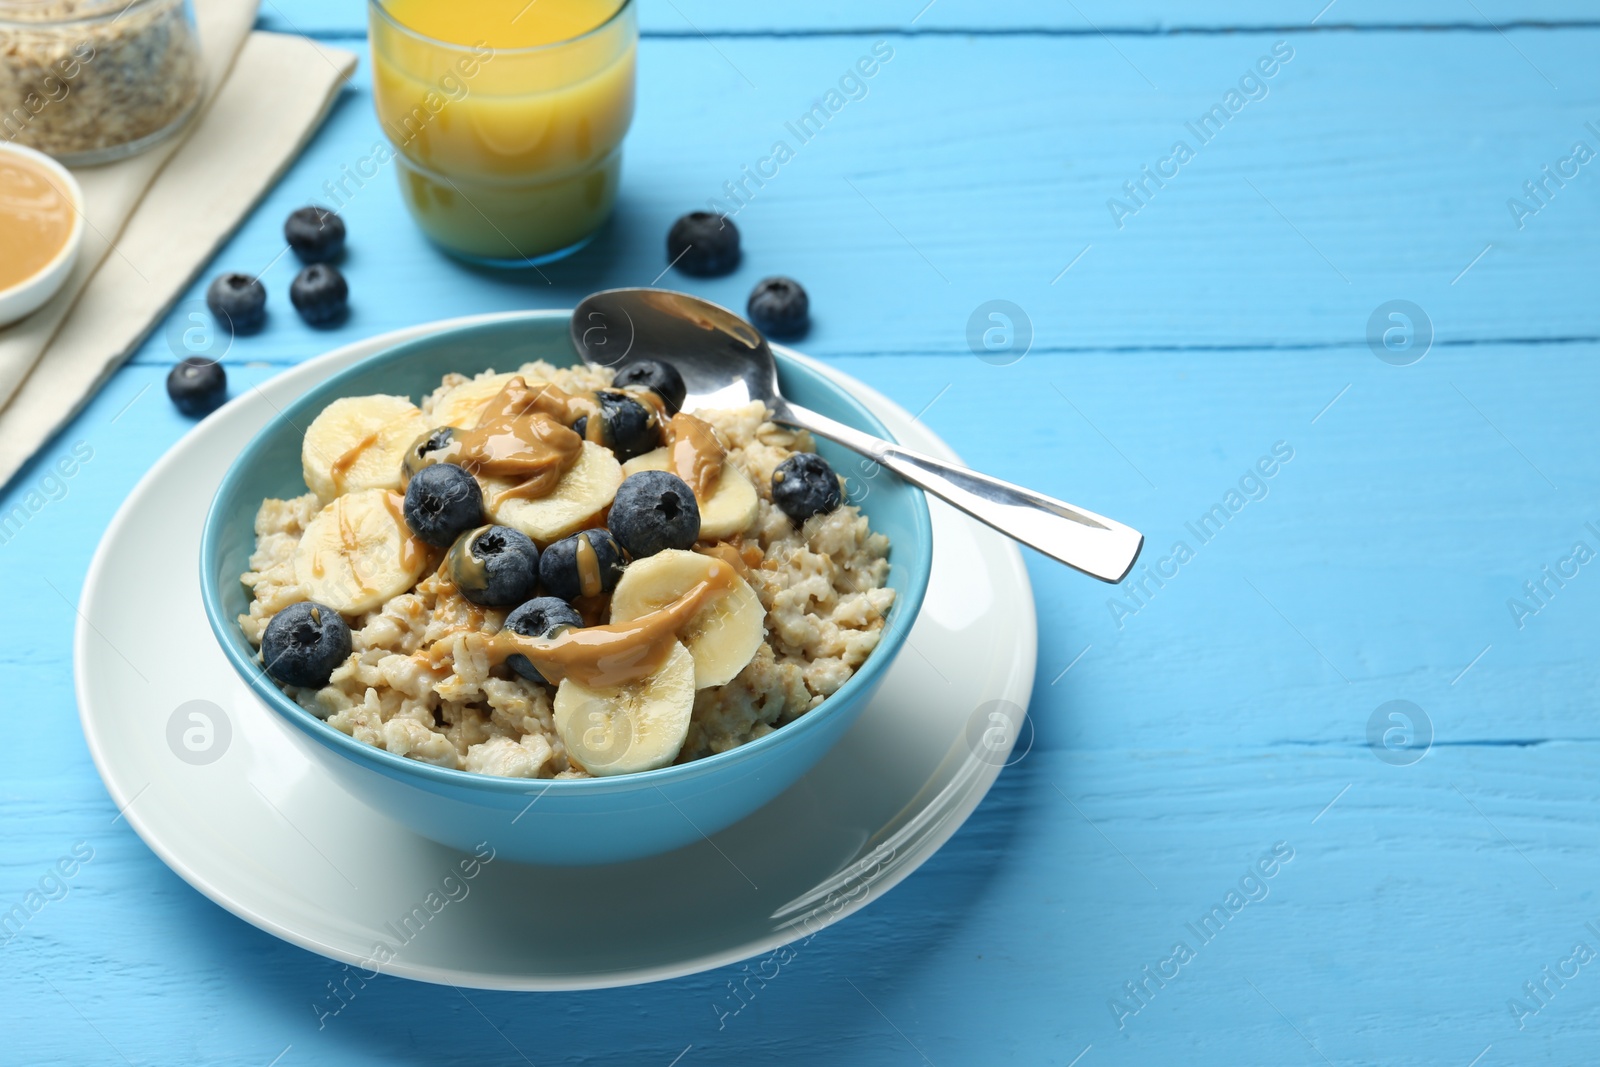 Photo of Tasty oatmeal with banana, blueberries and peanut butter served in bowl on light blue wooden table, space for text